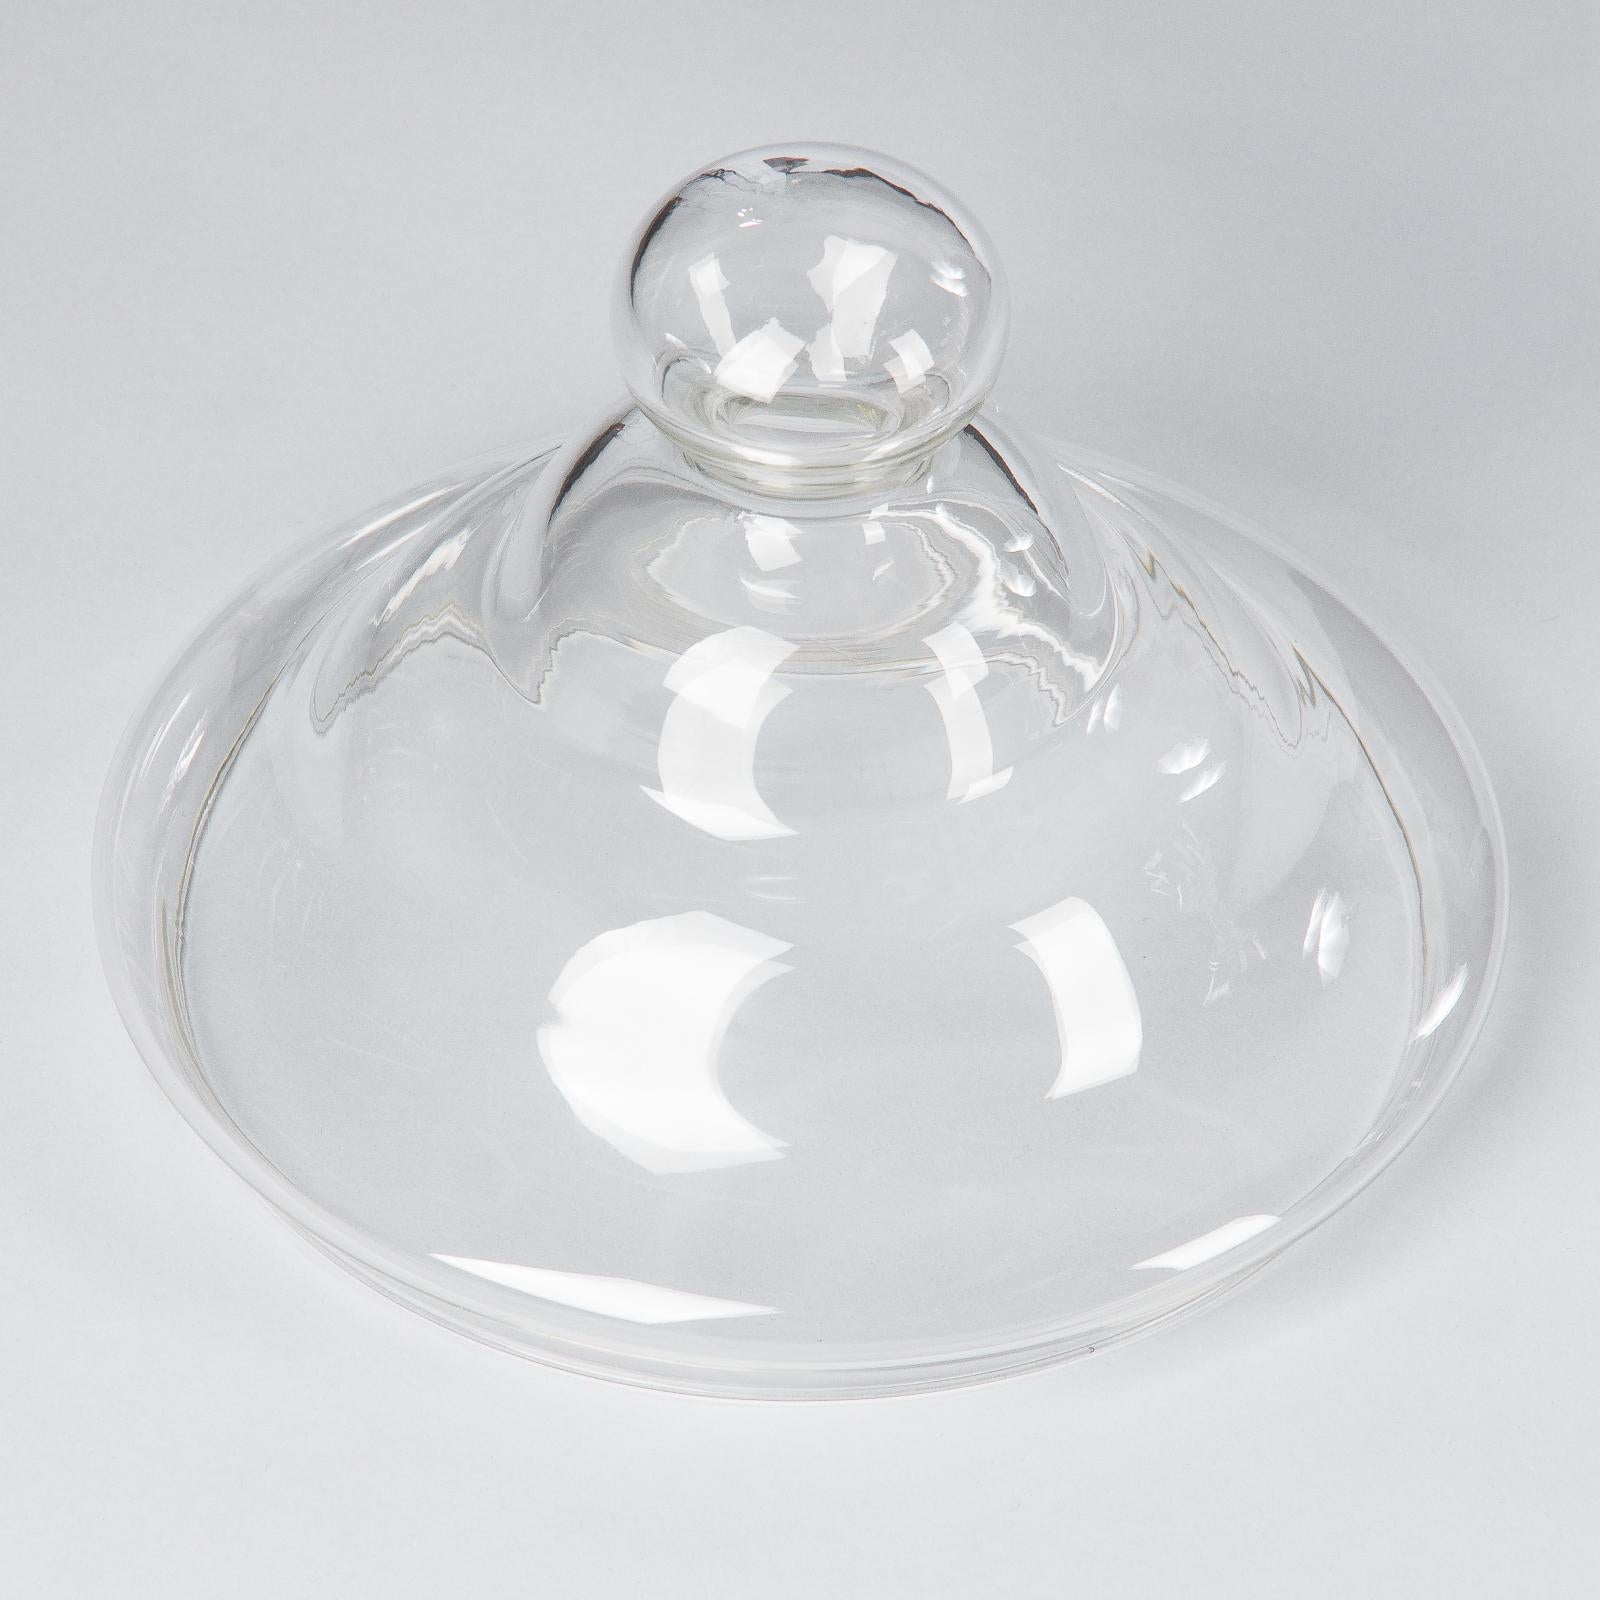 20th Century French Hand Blown Glass Lidded Candy Jar, Mid-1900s